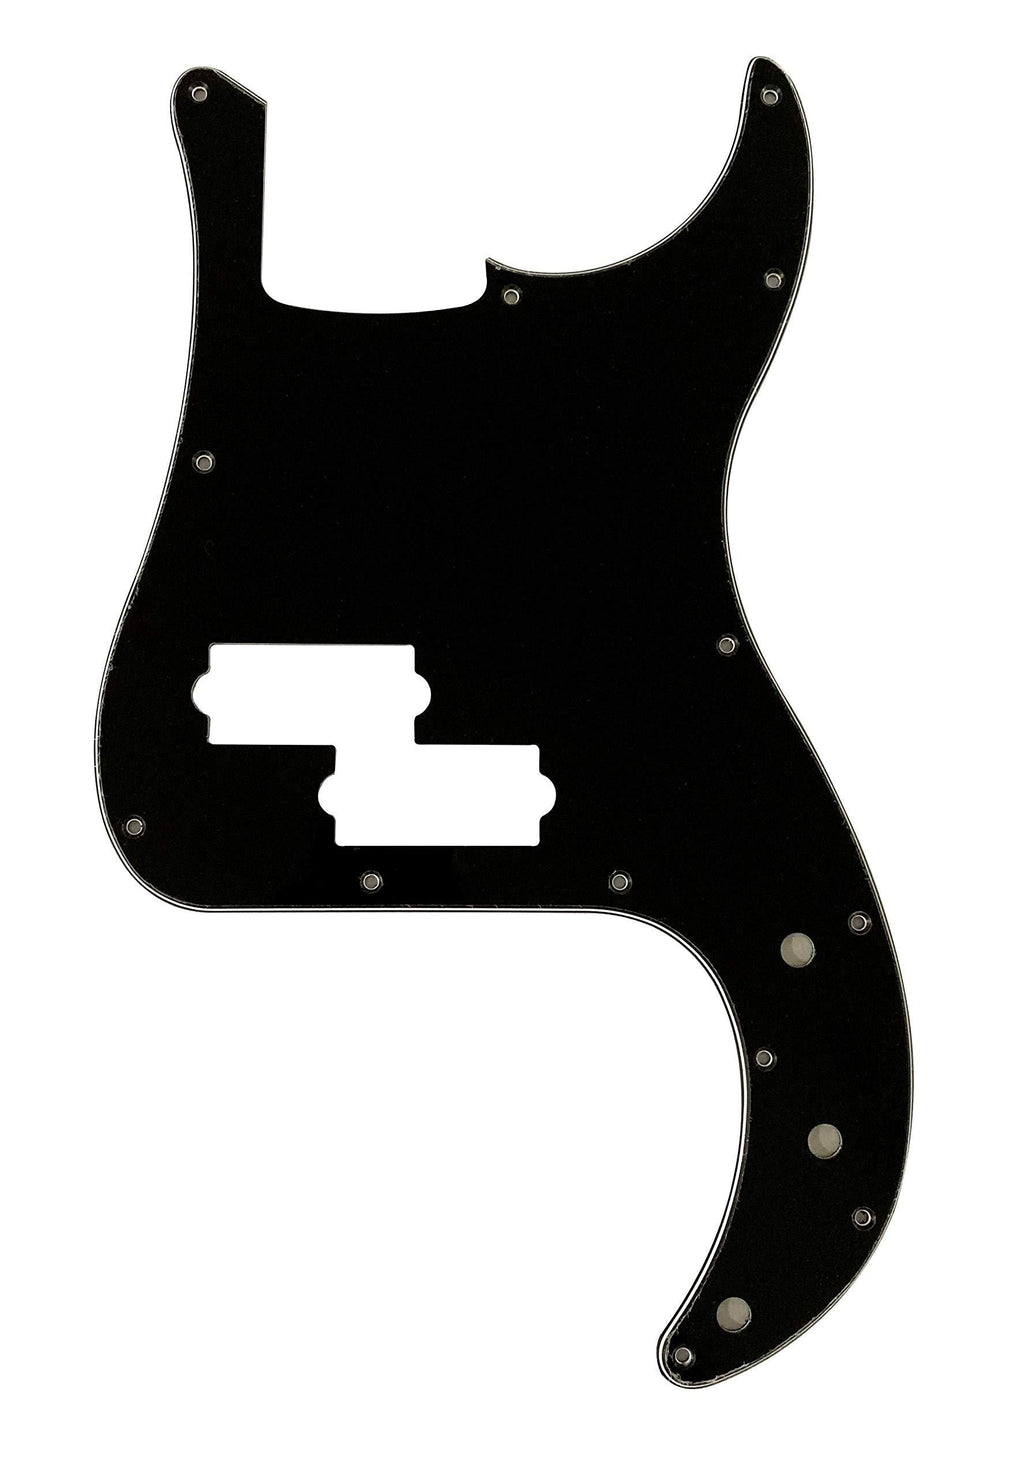 Custom For Fender US Standard Precision Bass Style Electric Guitar Pickguard (3 Ply Black) 3 Ply Black